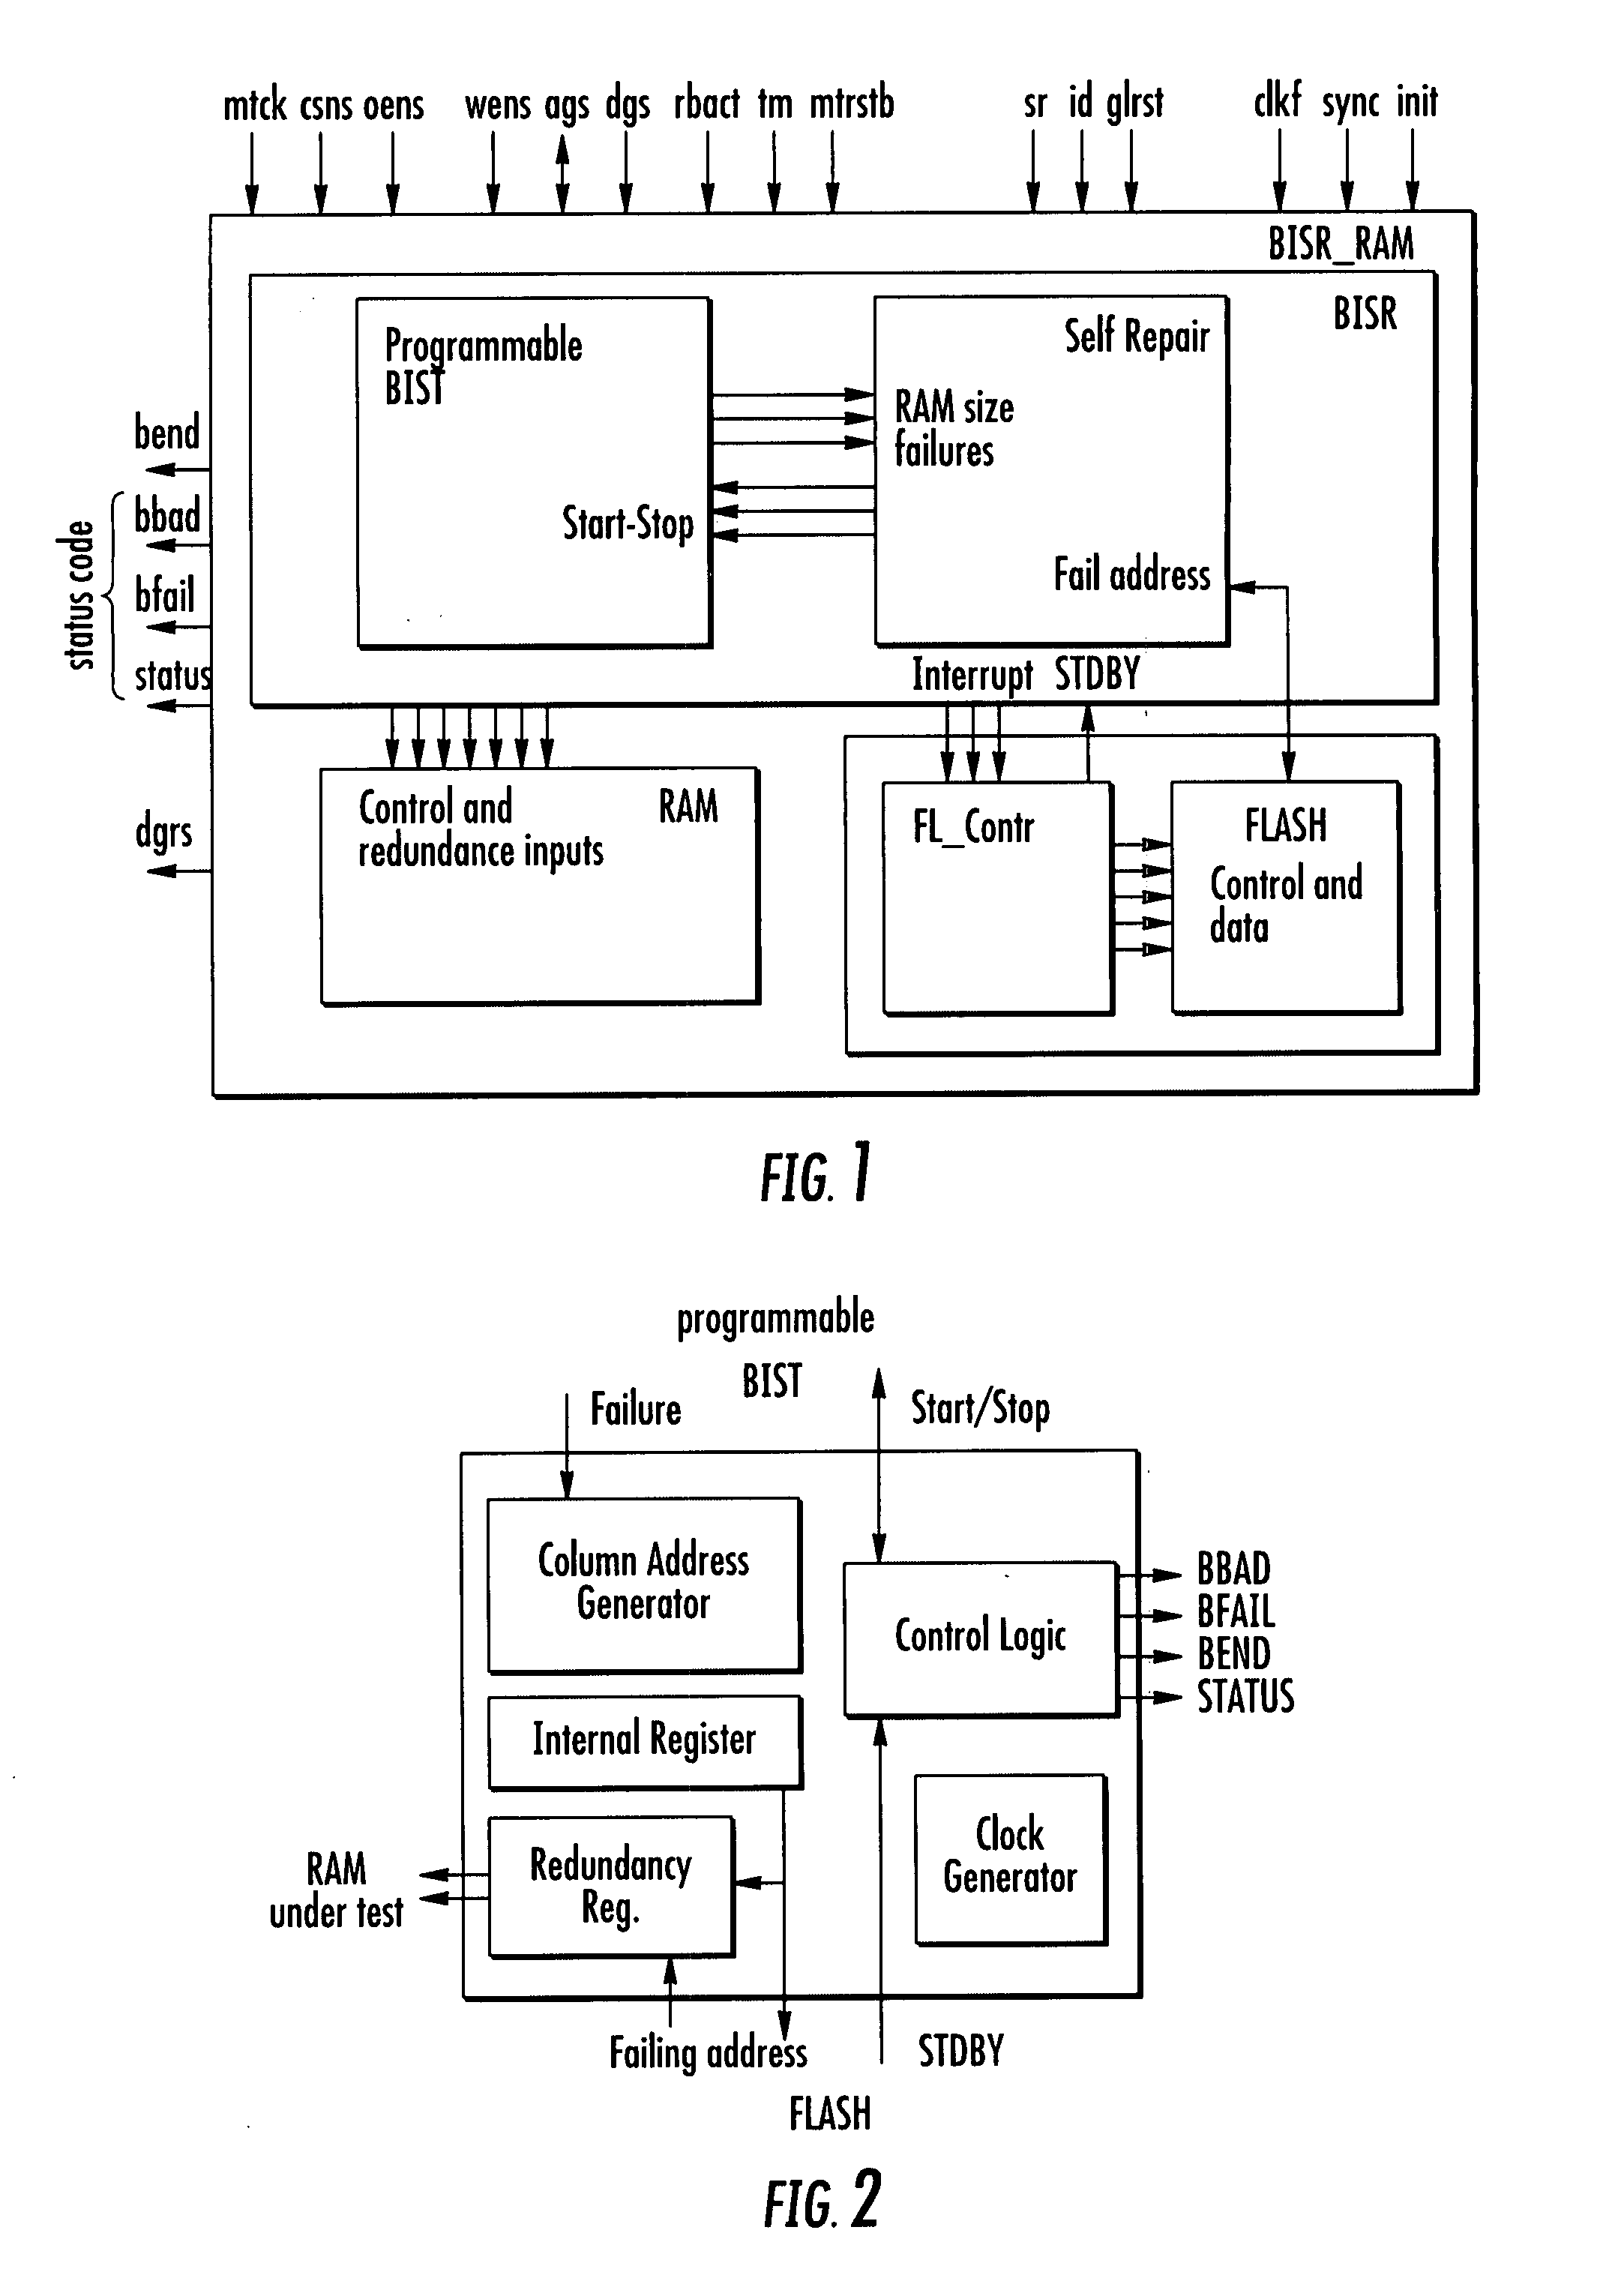 Programmable multi-mode built-in self-test and self-repair structure for embedded memory arrays